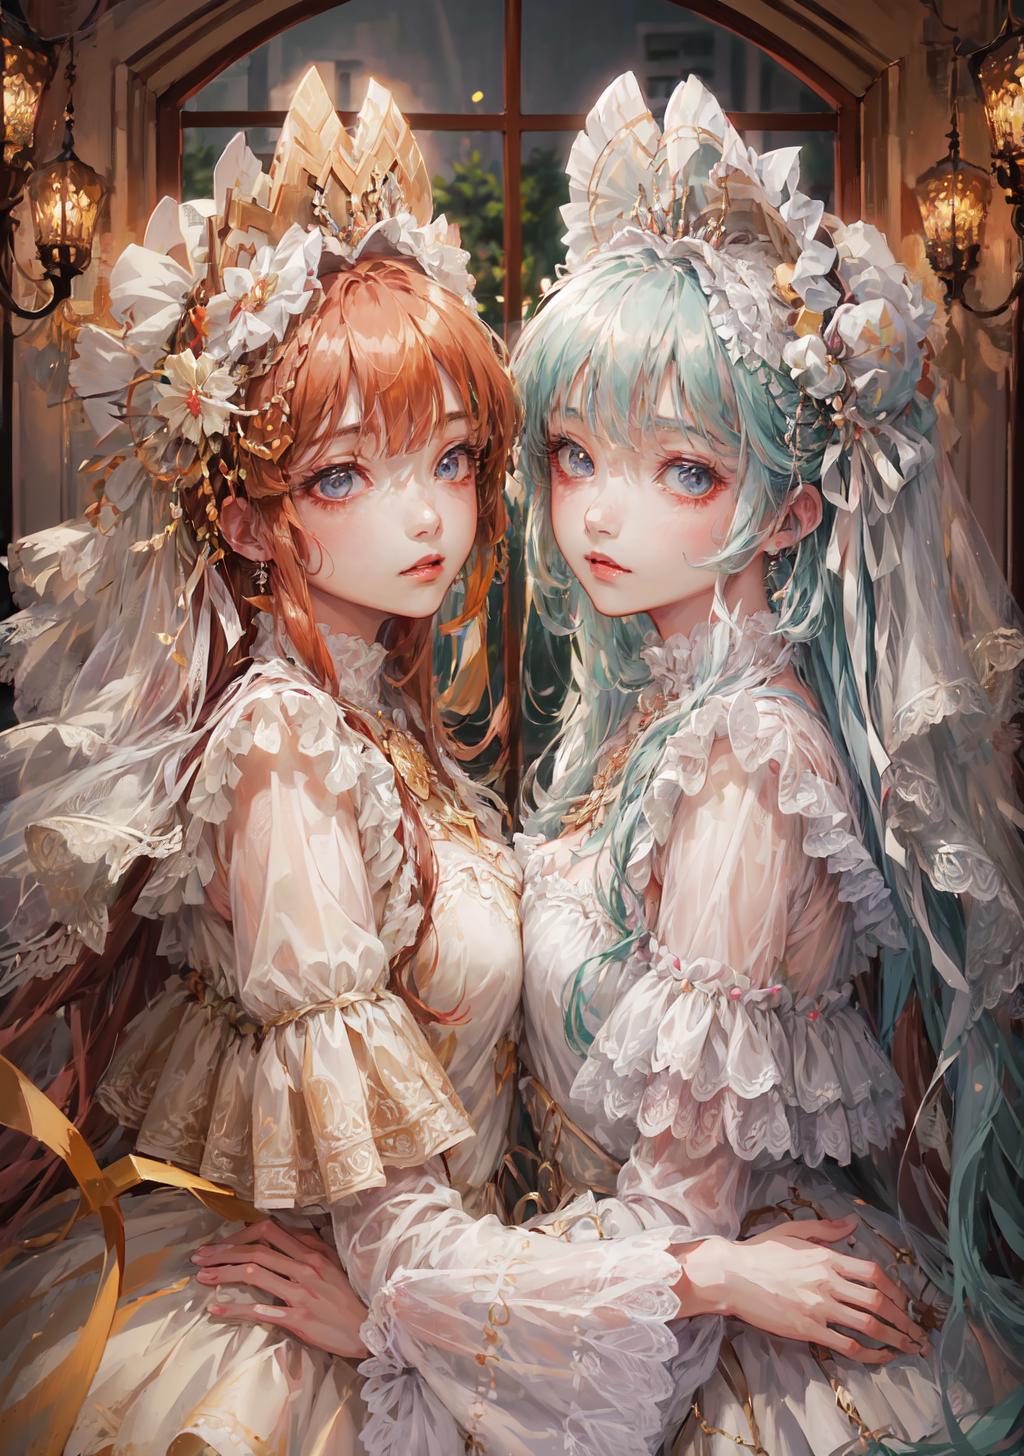 Two Anime Bridesmaids in Wedding Dresses with Flowers in Their Hair